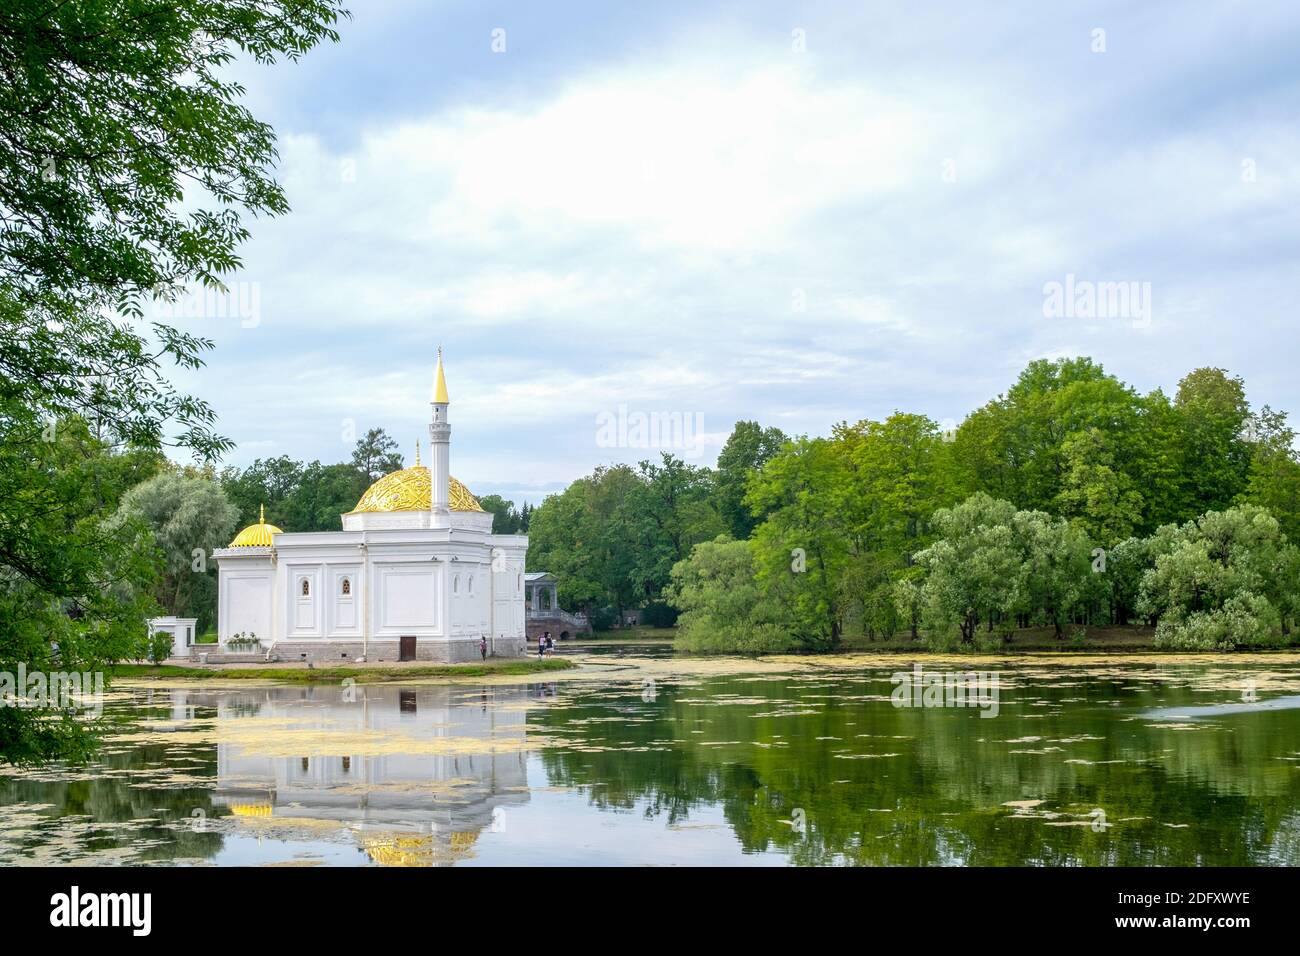 St. Petersburg, Pushkin, Russia. - August 22, 2020. View of the pond and the building of the Turkish Bath in Catherine Park. Local tourism, history, c Stock Photo